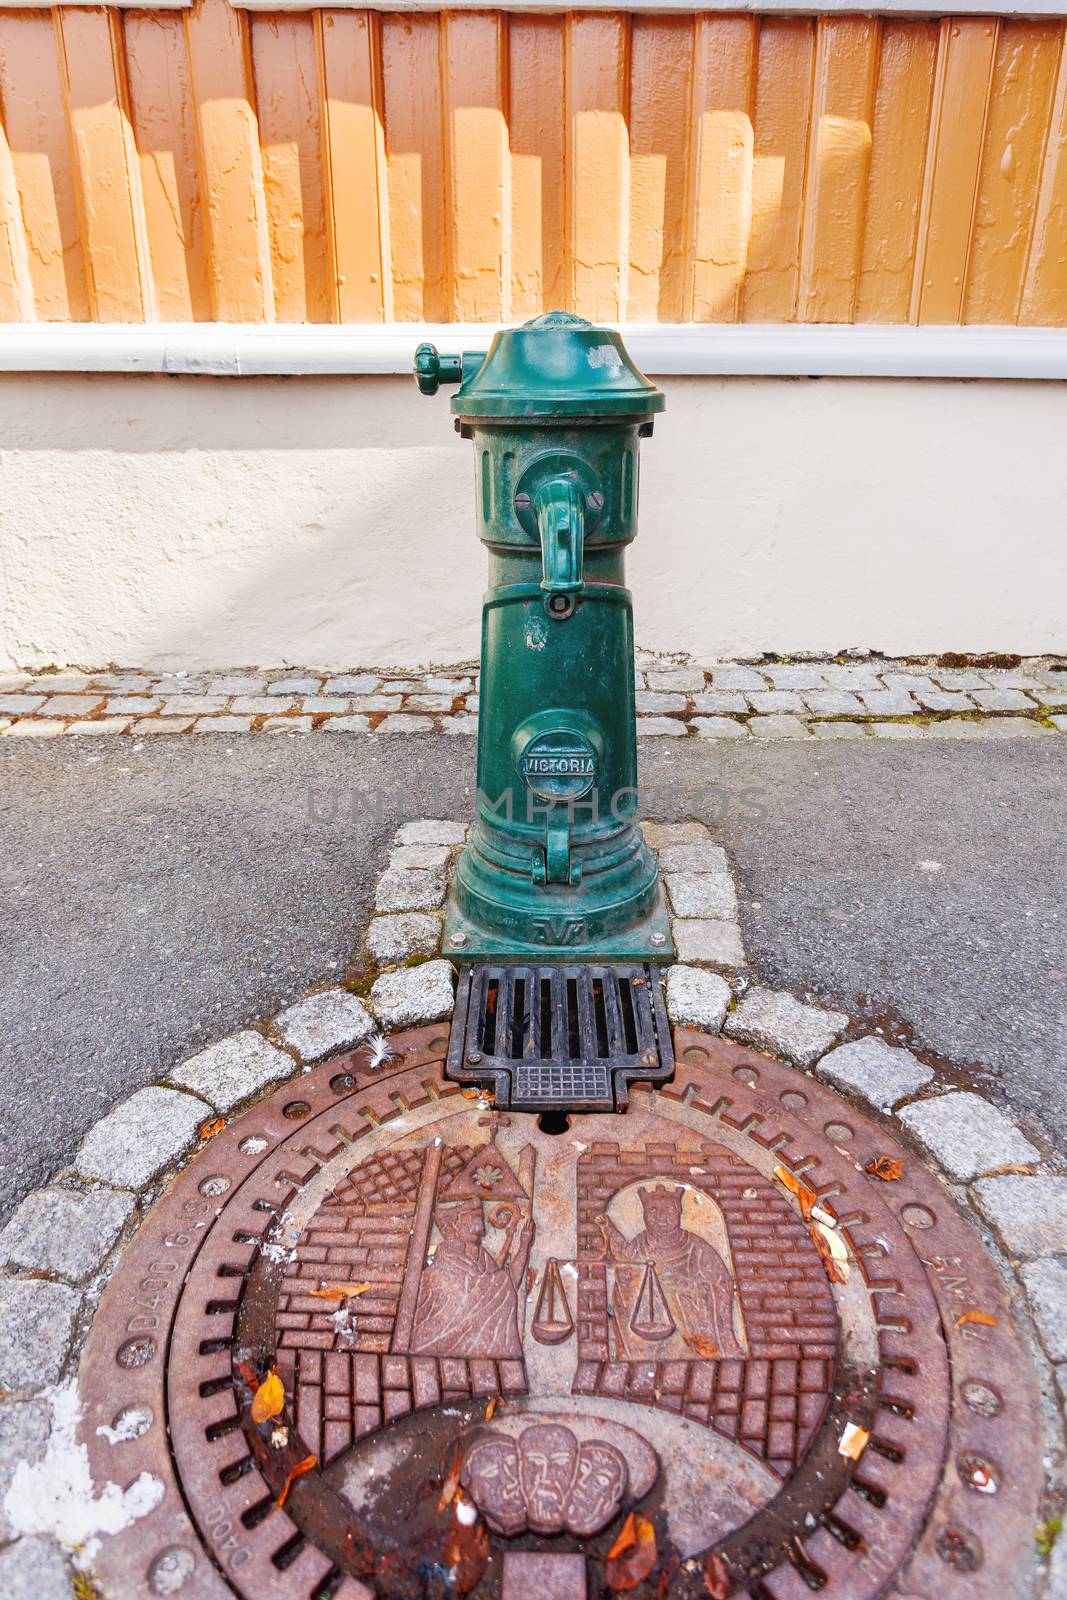 Metal sewerage hatchway and old fashioned water standpipe with bas relief. Iron manhole with historic scene. Trondheim, Norway.